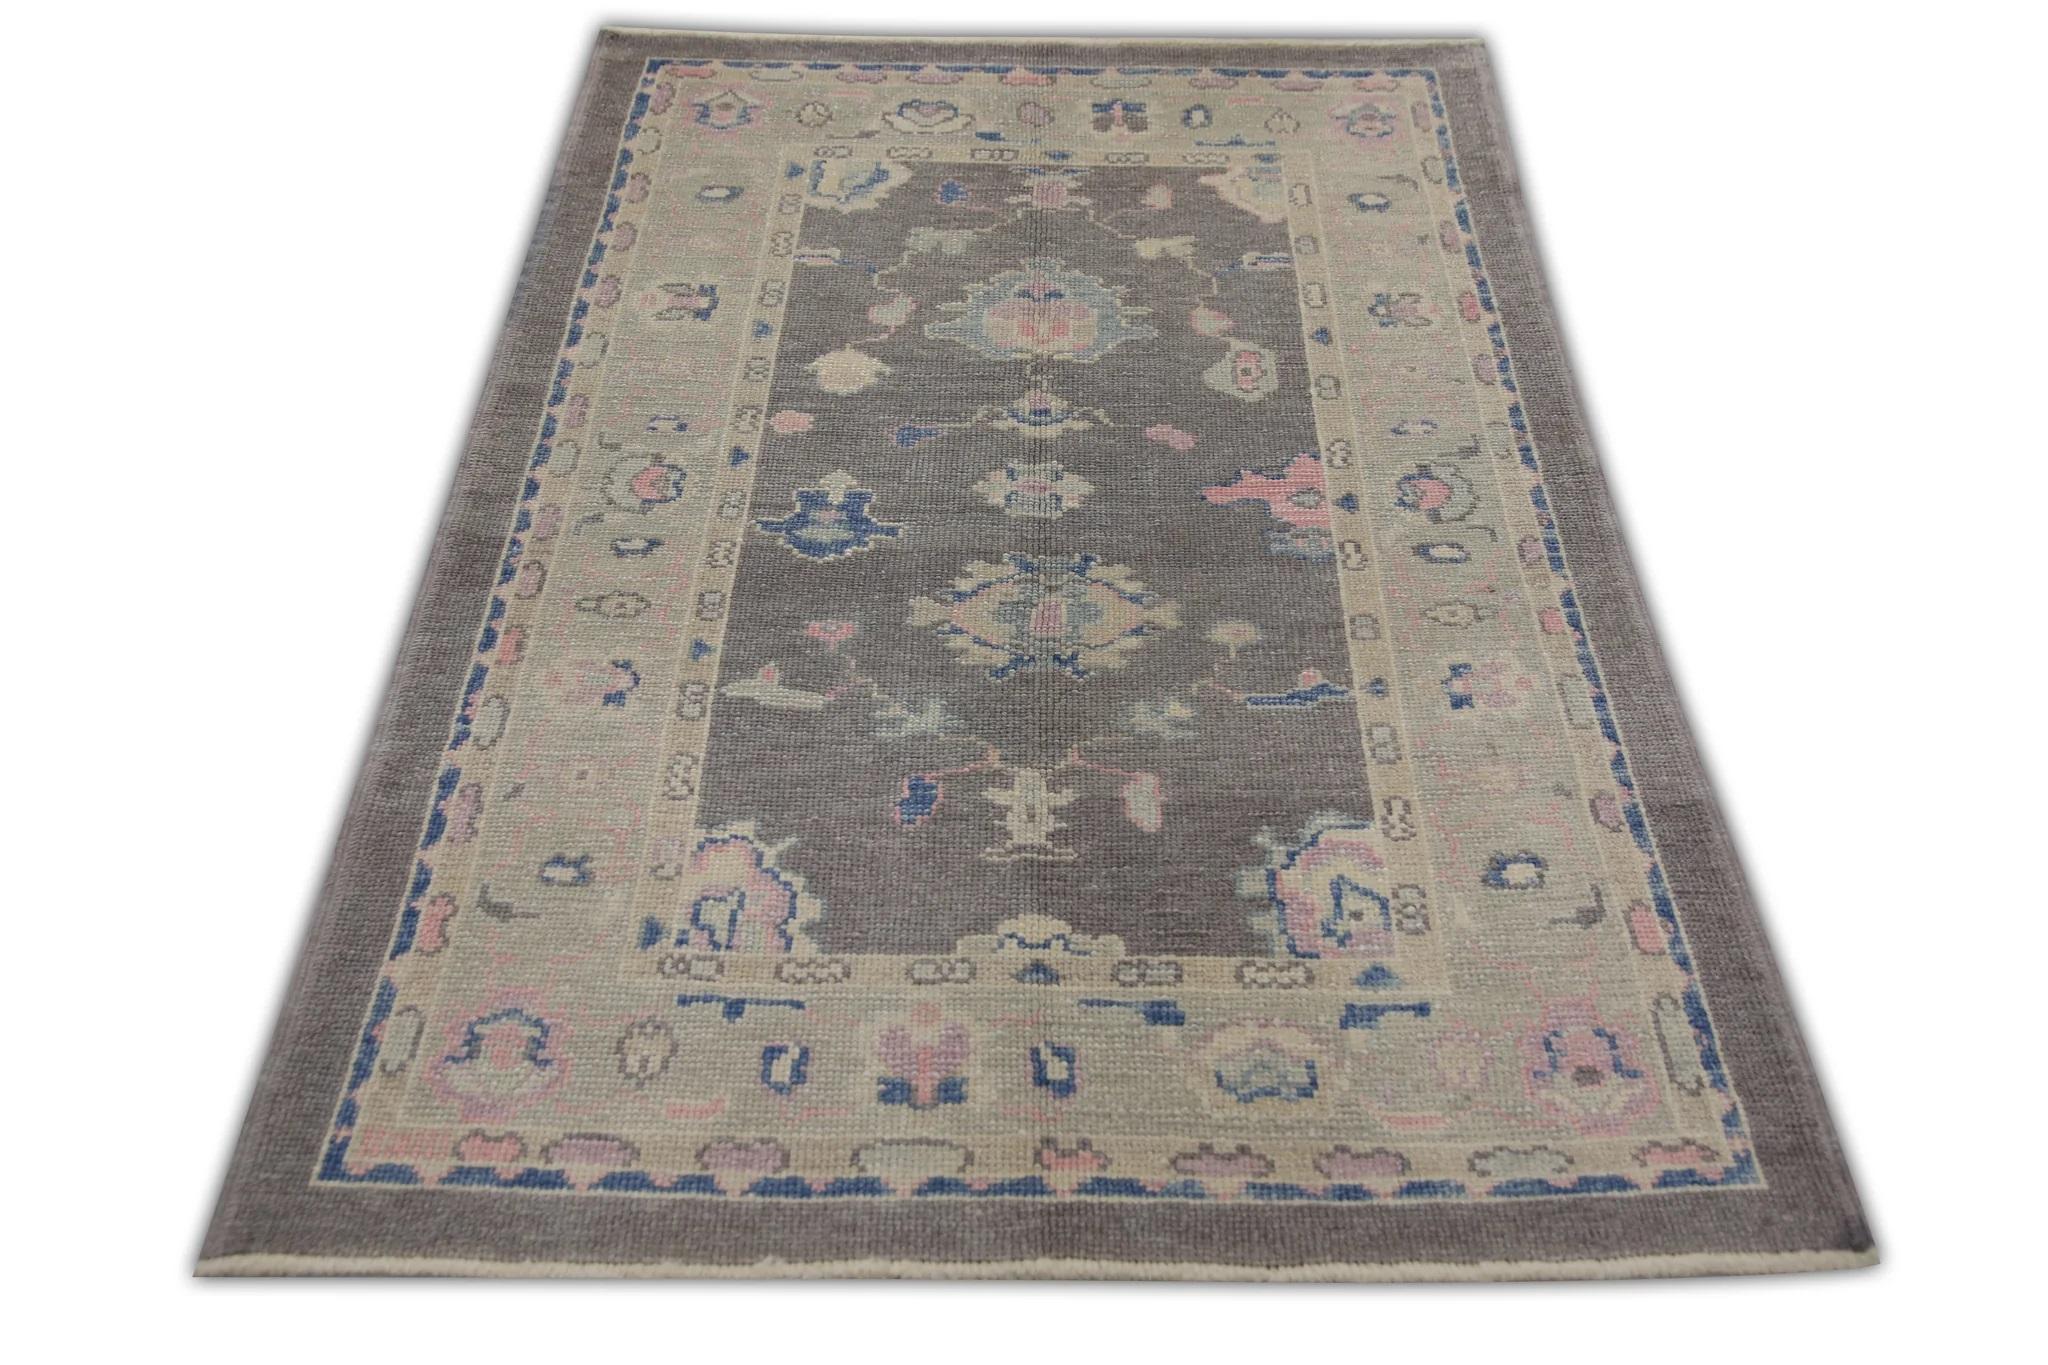 Dark Mauve Handwoven Wool Turkish Oushak Rug in Colorful Floral Design 4' x 5'11 In New Condition For Sale In Houston, TX